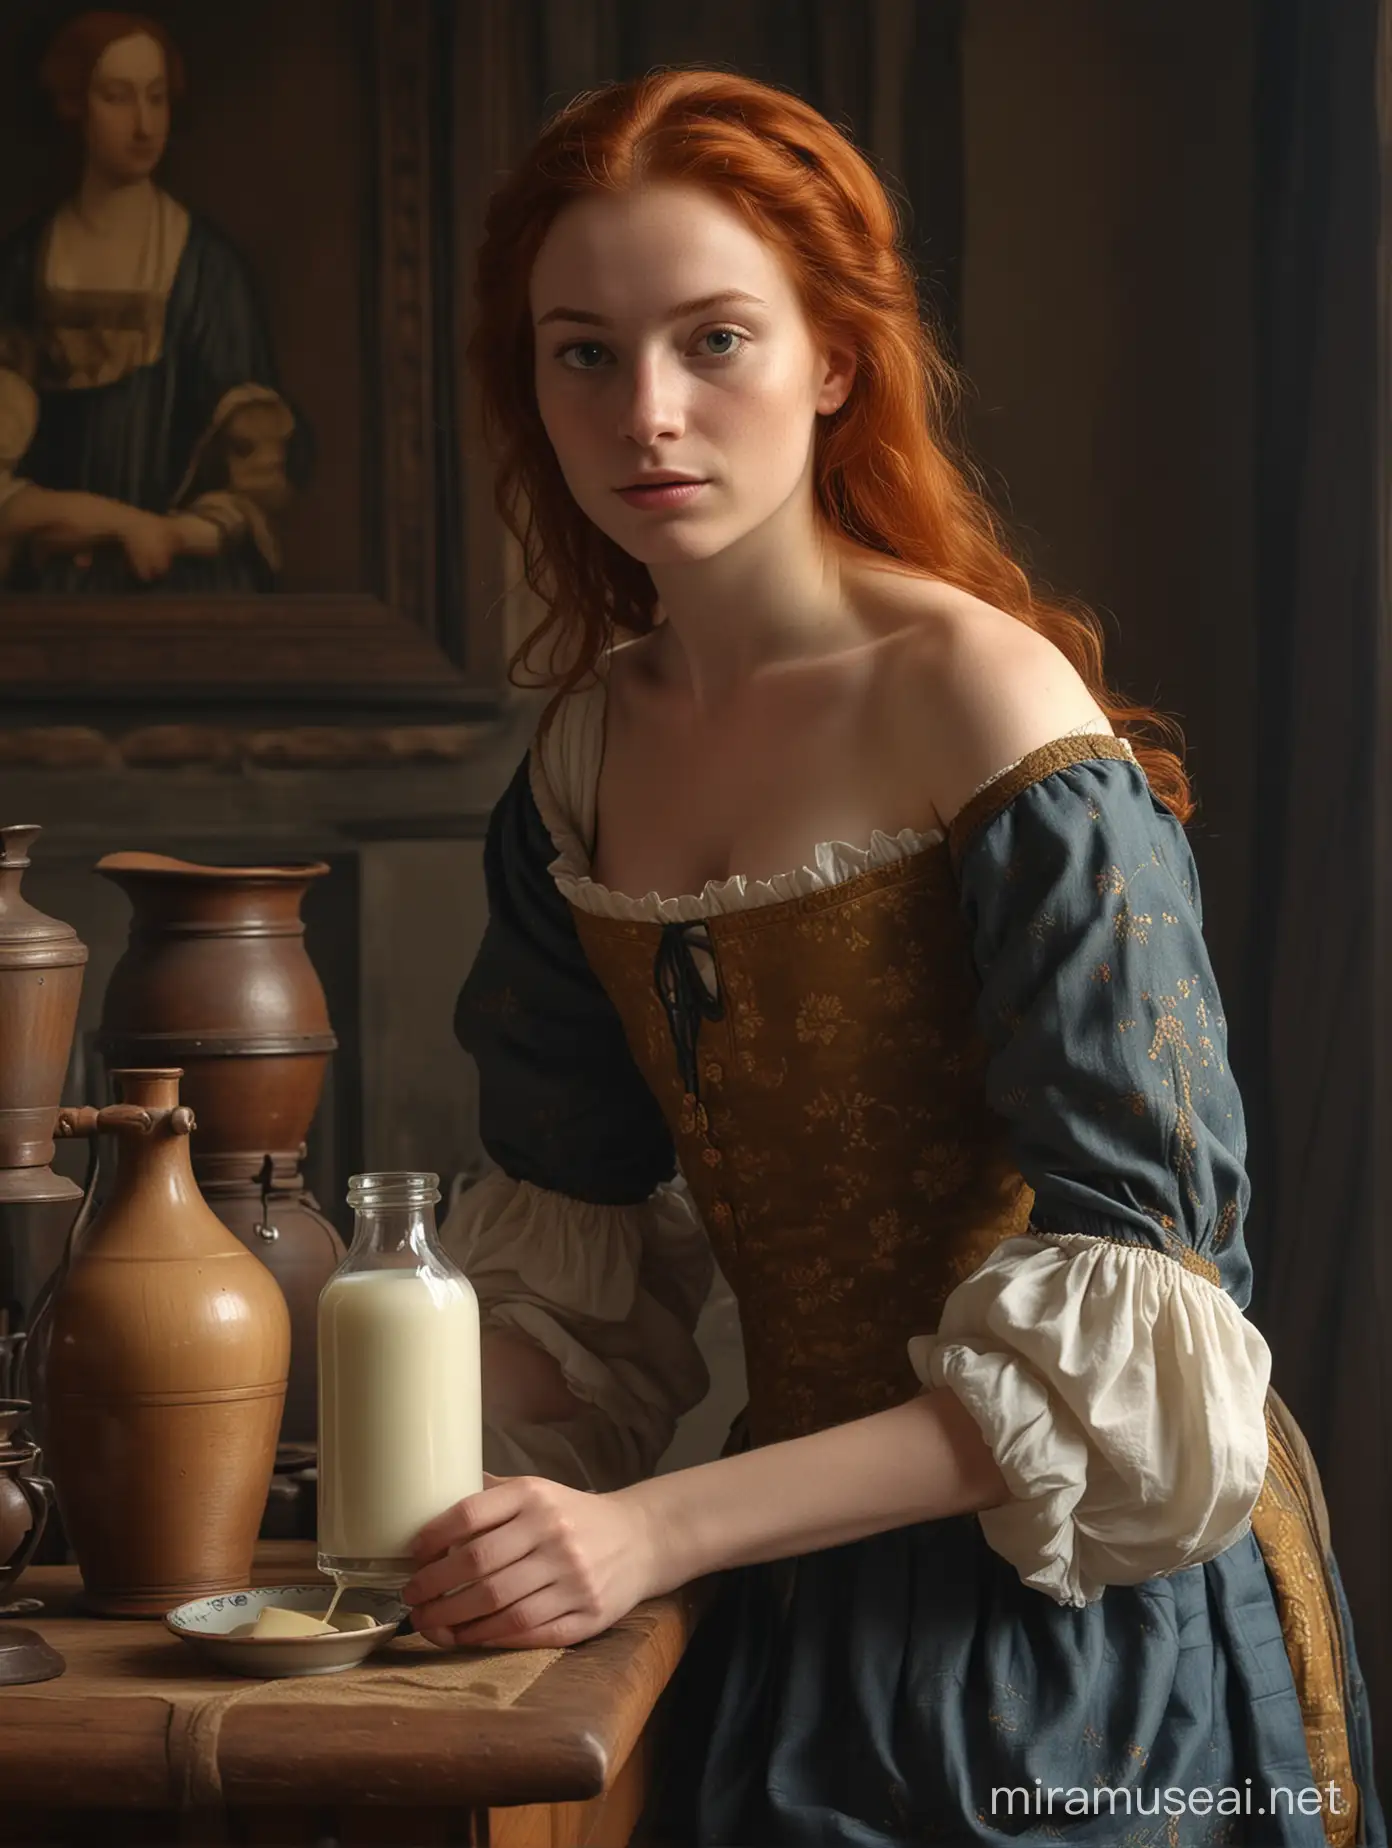 25 years old beautiful sensueal girl red hair in a 17th century dutch setting as johannes vermeer. She is pooring milk and she is naked, wearing hardly any clothes and her chest size is 80 and has fitted hips. photo will realistic 4k and photo will taken with 200 mm ultra hd lens.